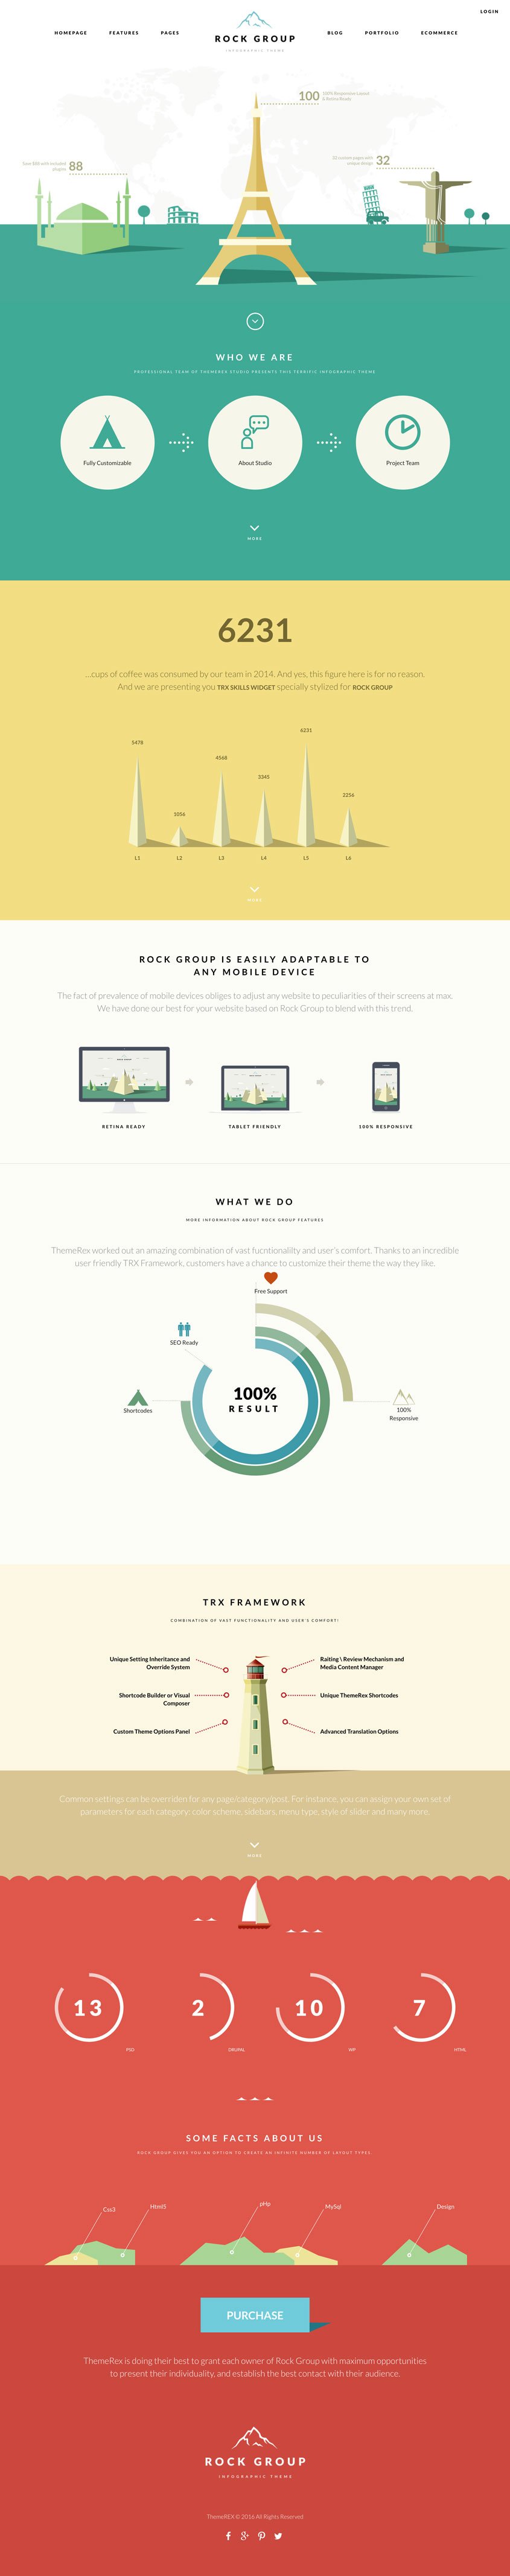 Rock Group Infographic Theme - Clean Website design examples to help inspire you